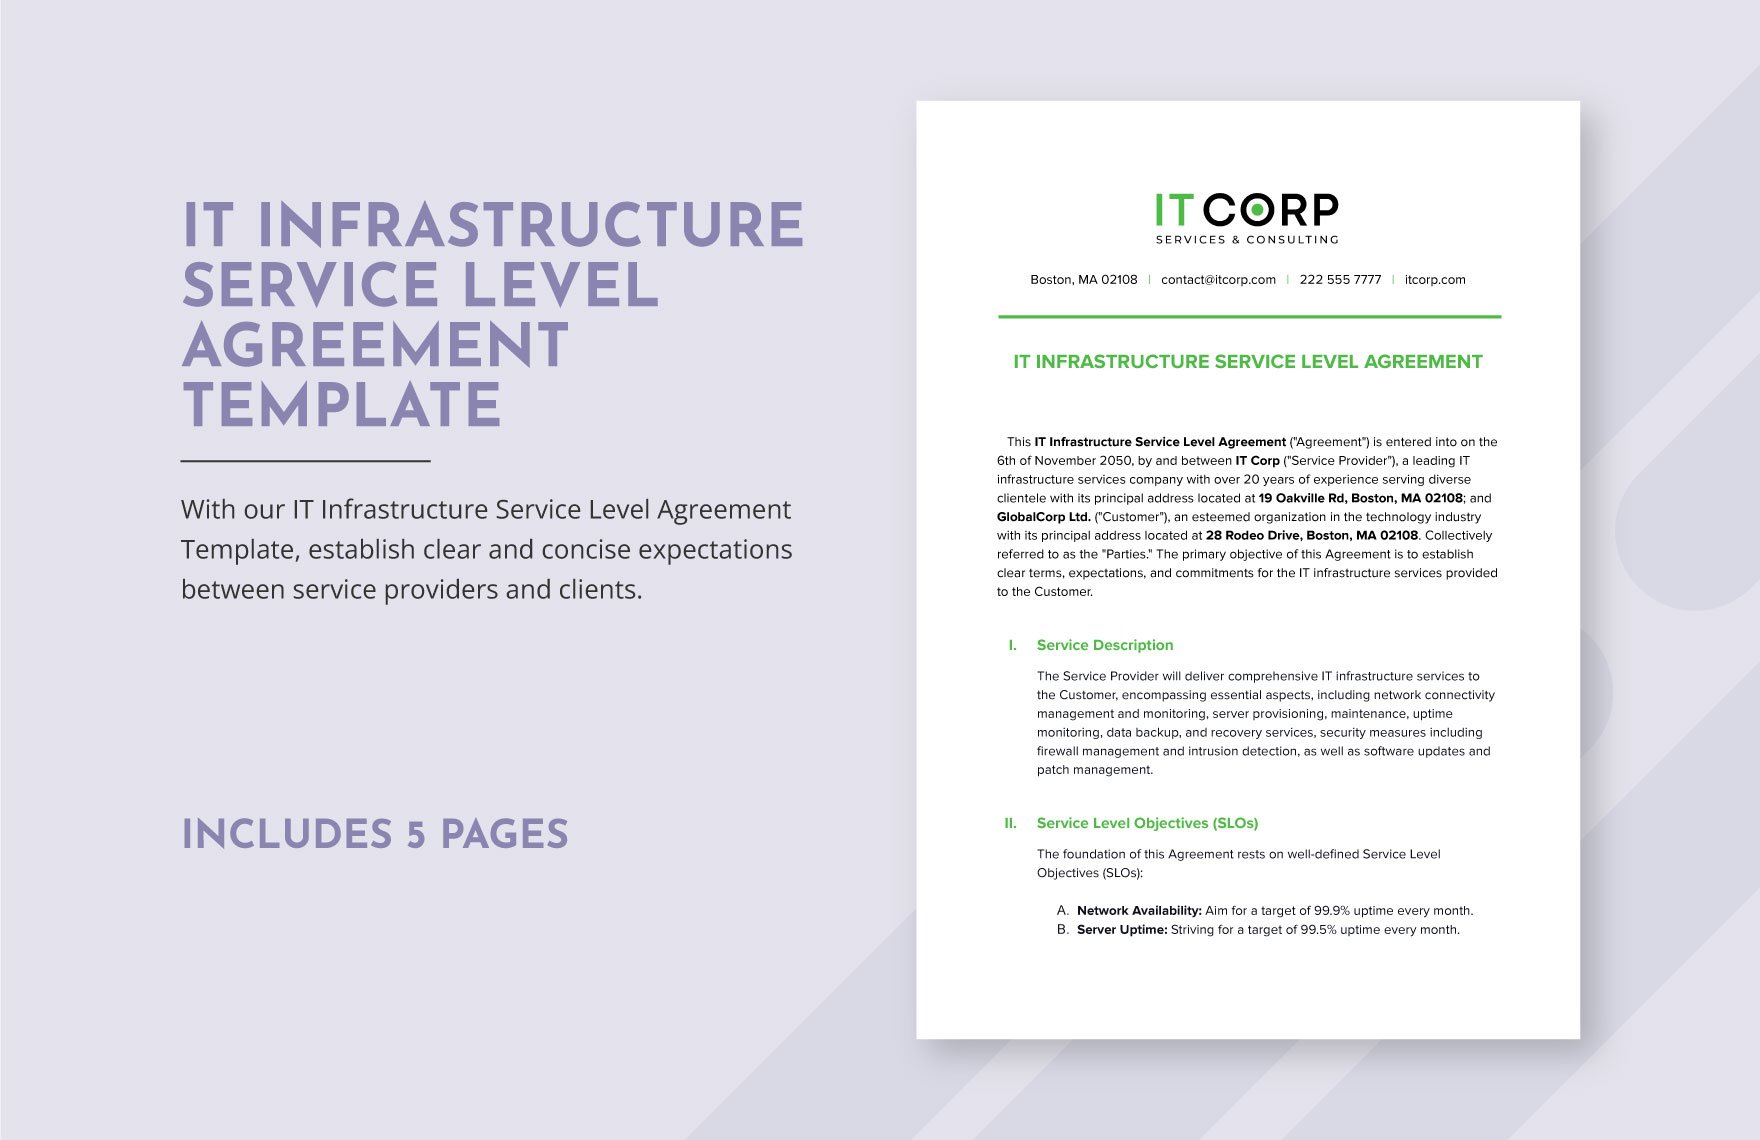 IT Infrastructure Service Level Agreement Template